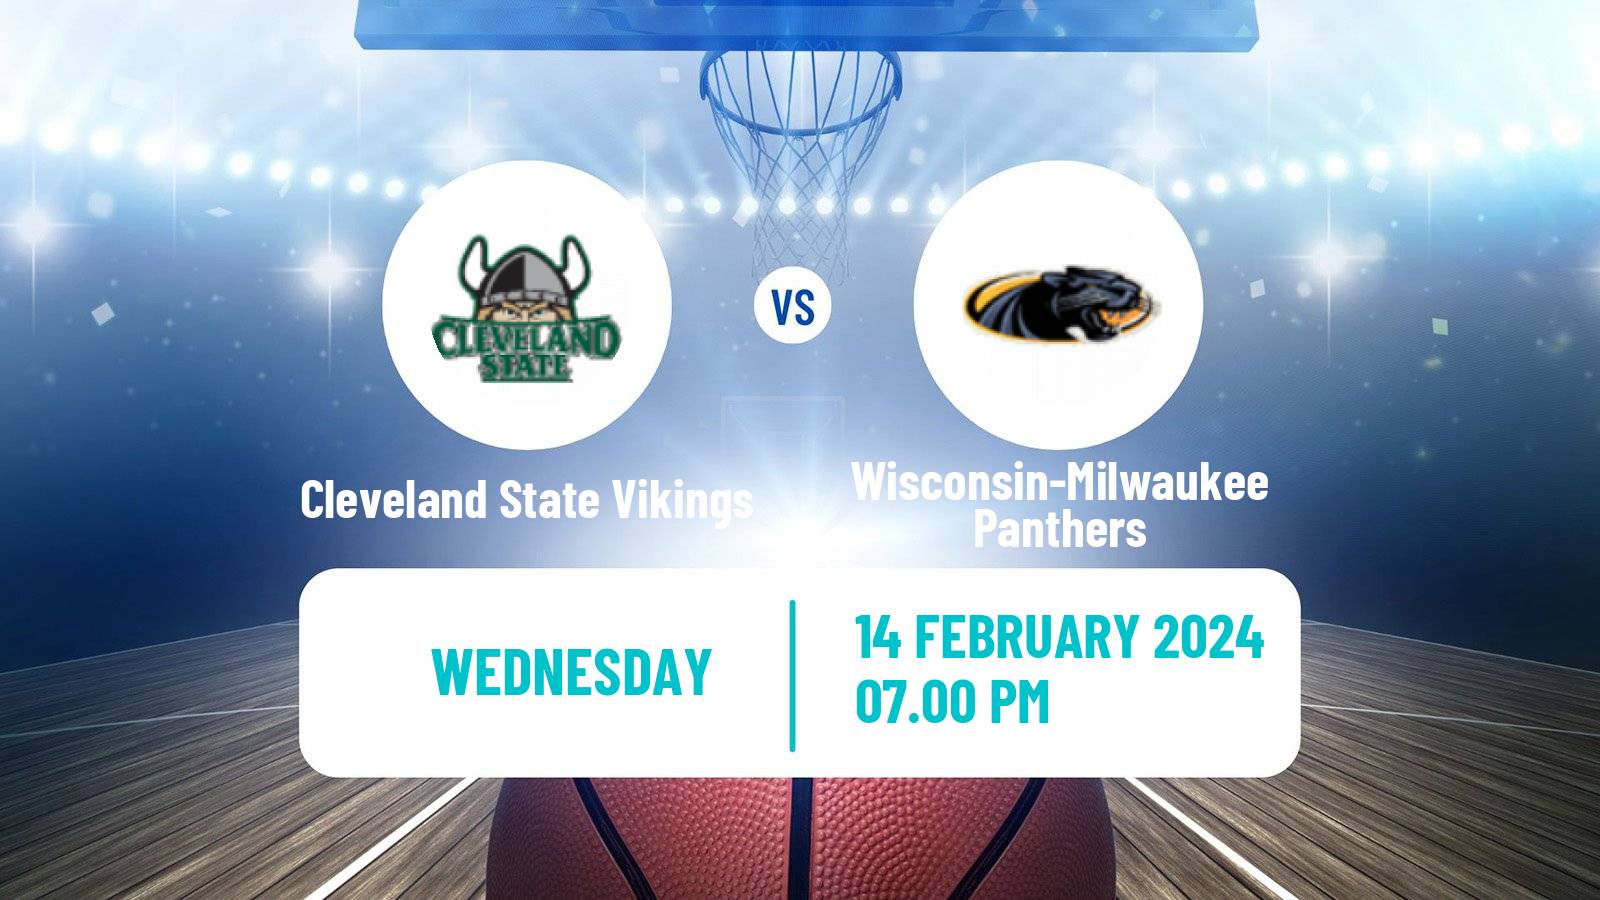 Basketball NCAA College Basketball Cleveland State Vikings - Wisconsin-Milwaukee Panthers